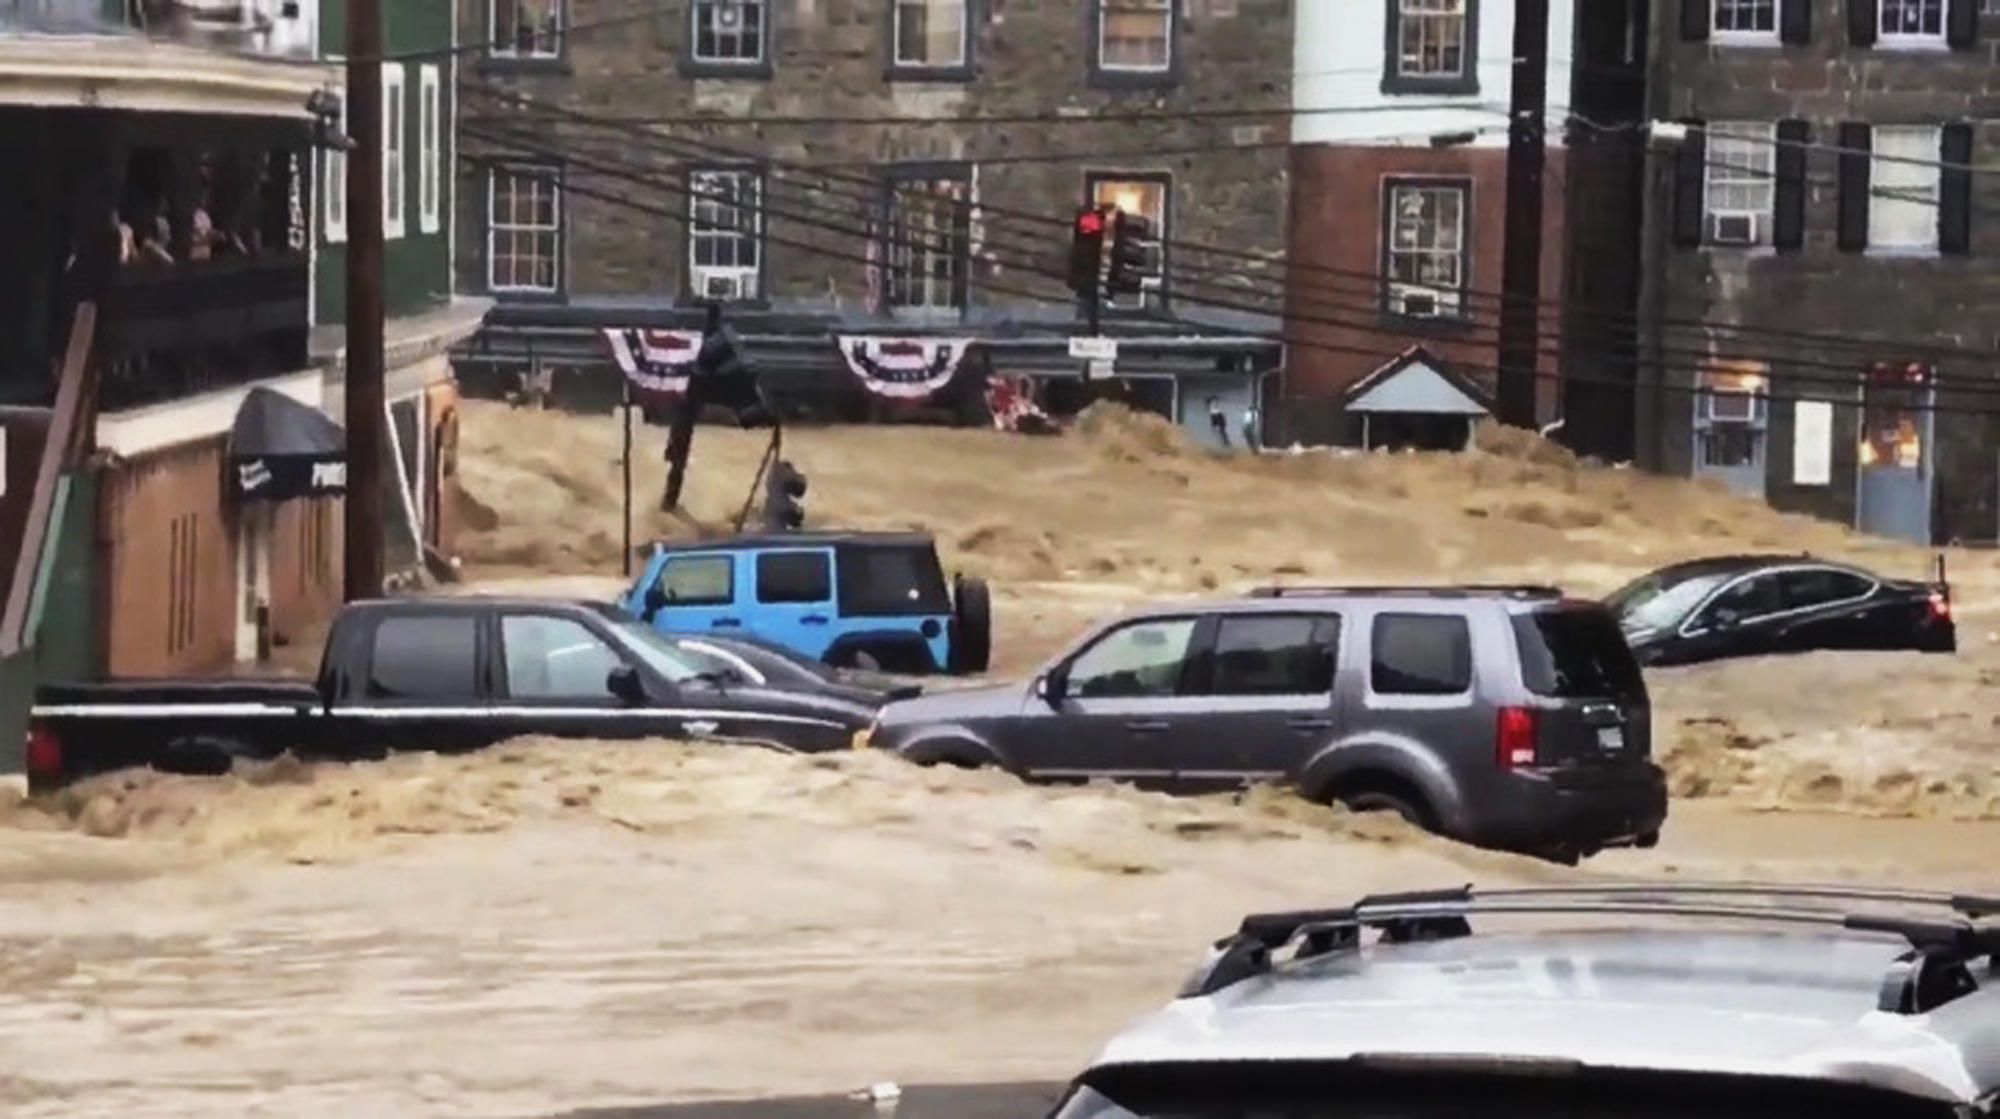 Ellicott City, Maryland flooding: Dangerous flood waters hit city still recovering from 2016 flood - CBS News